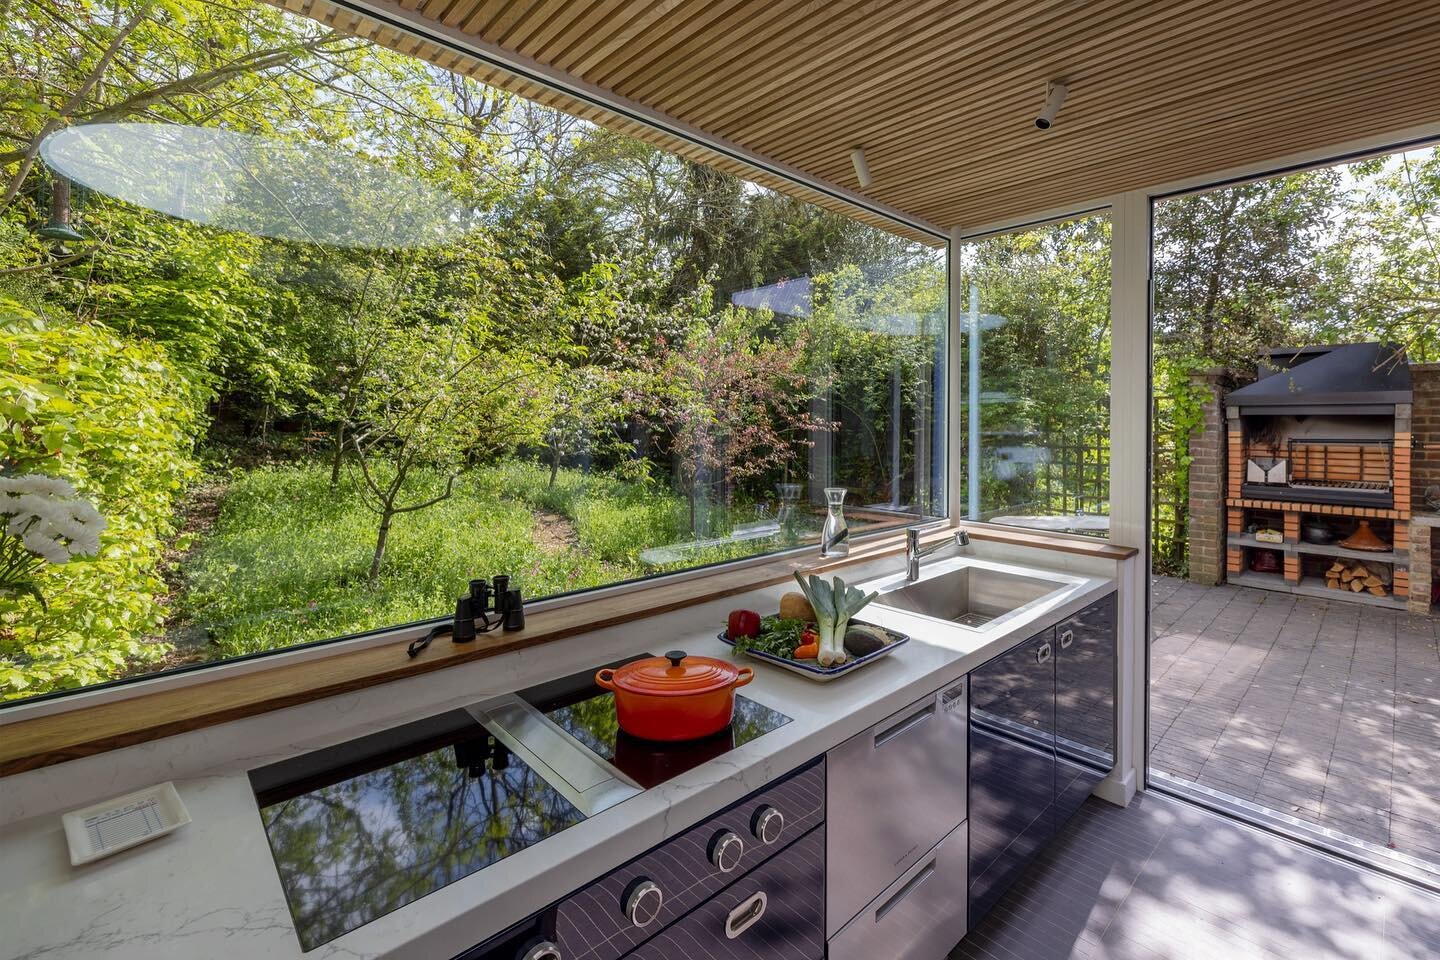 View from the kitchen of the recent Dulwich Wood project with @a_small_studio 
Featured in @dwellmagazine 
Check out the bio link for further images and link to the article.
.
.
.
.
.
#gardens #gardendesign #gardendesigner #londongarden #londongarden